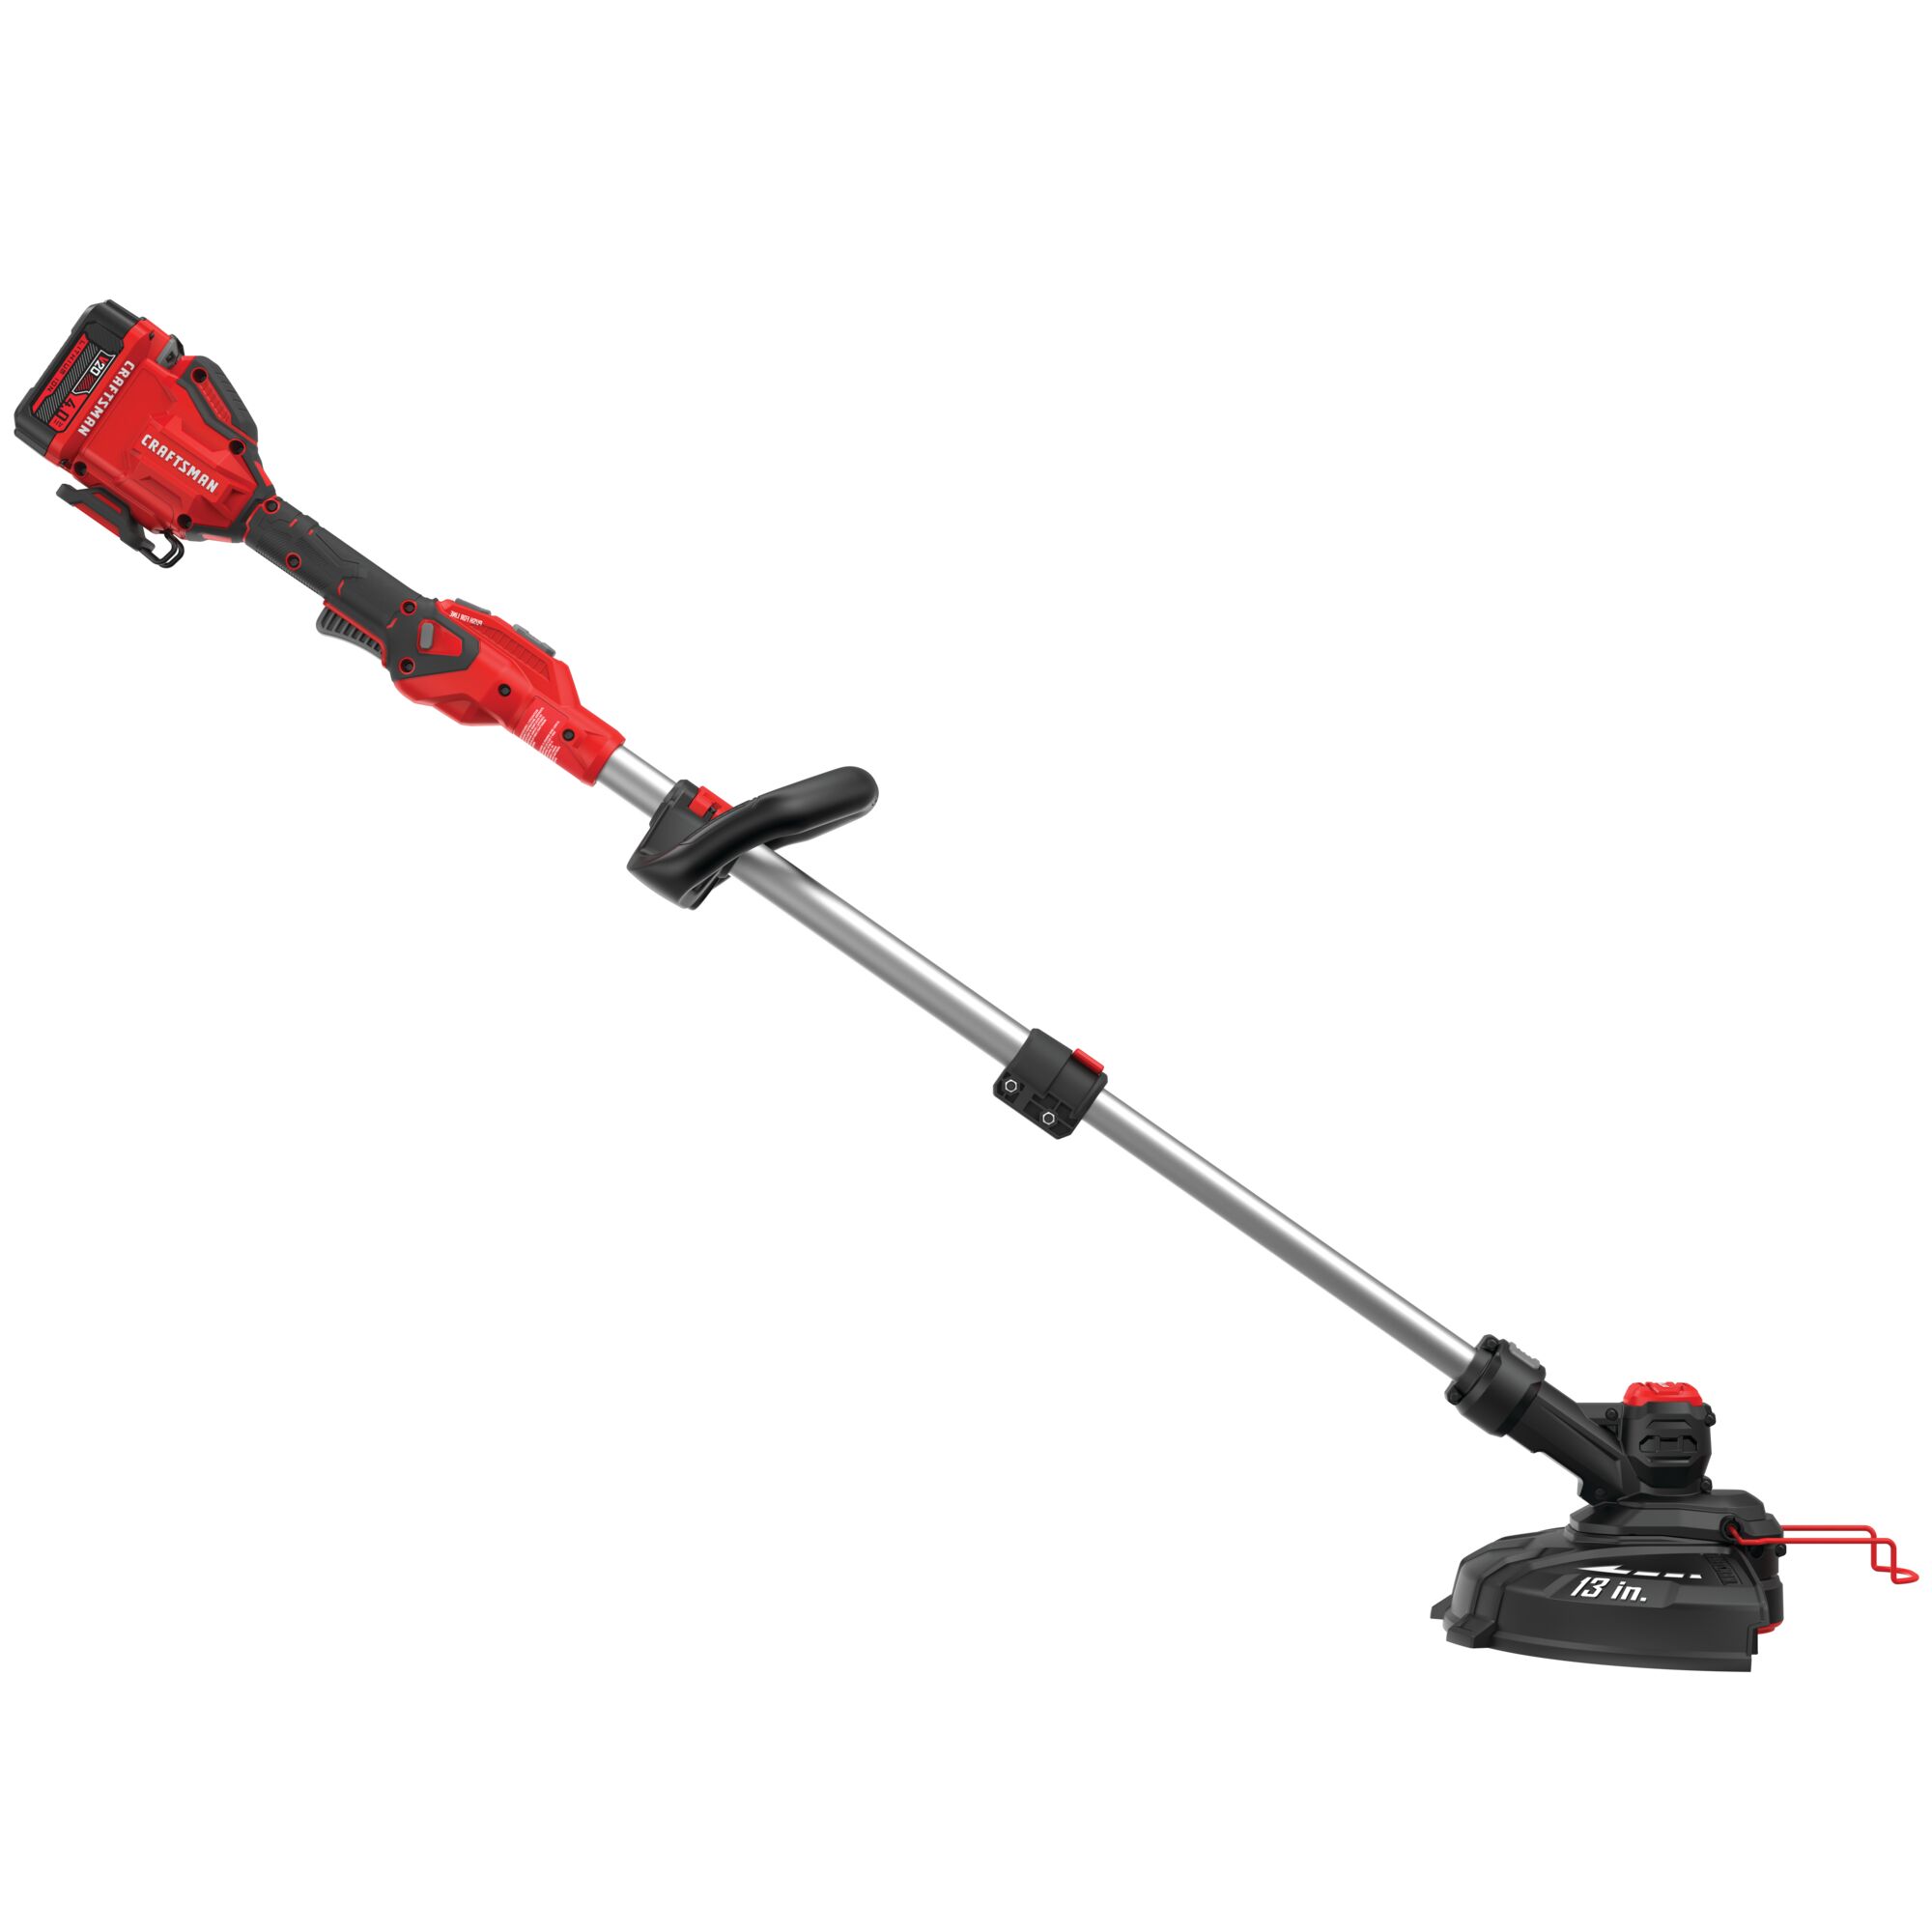 20 volt weedwacker 13 inch cordless string trimmer and edger with push button feed kit.